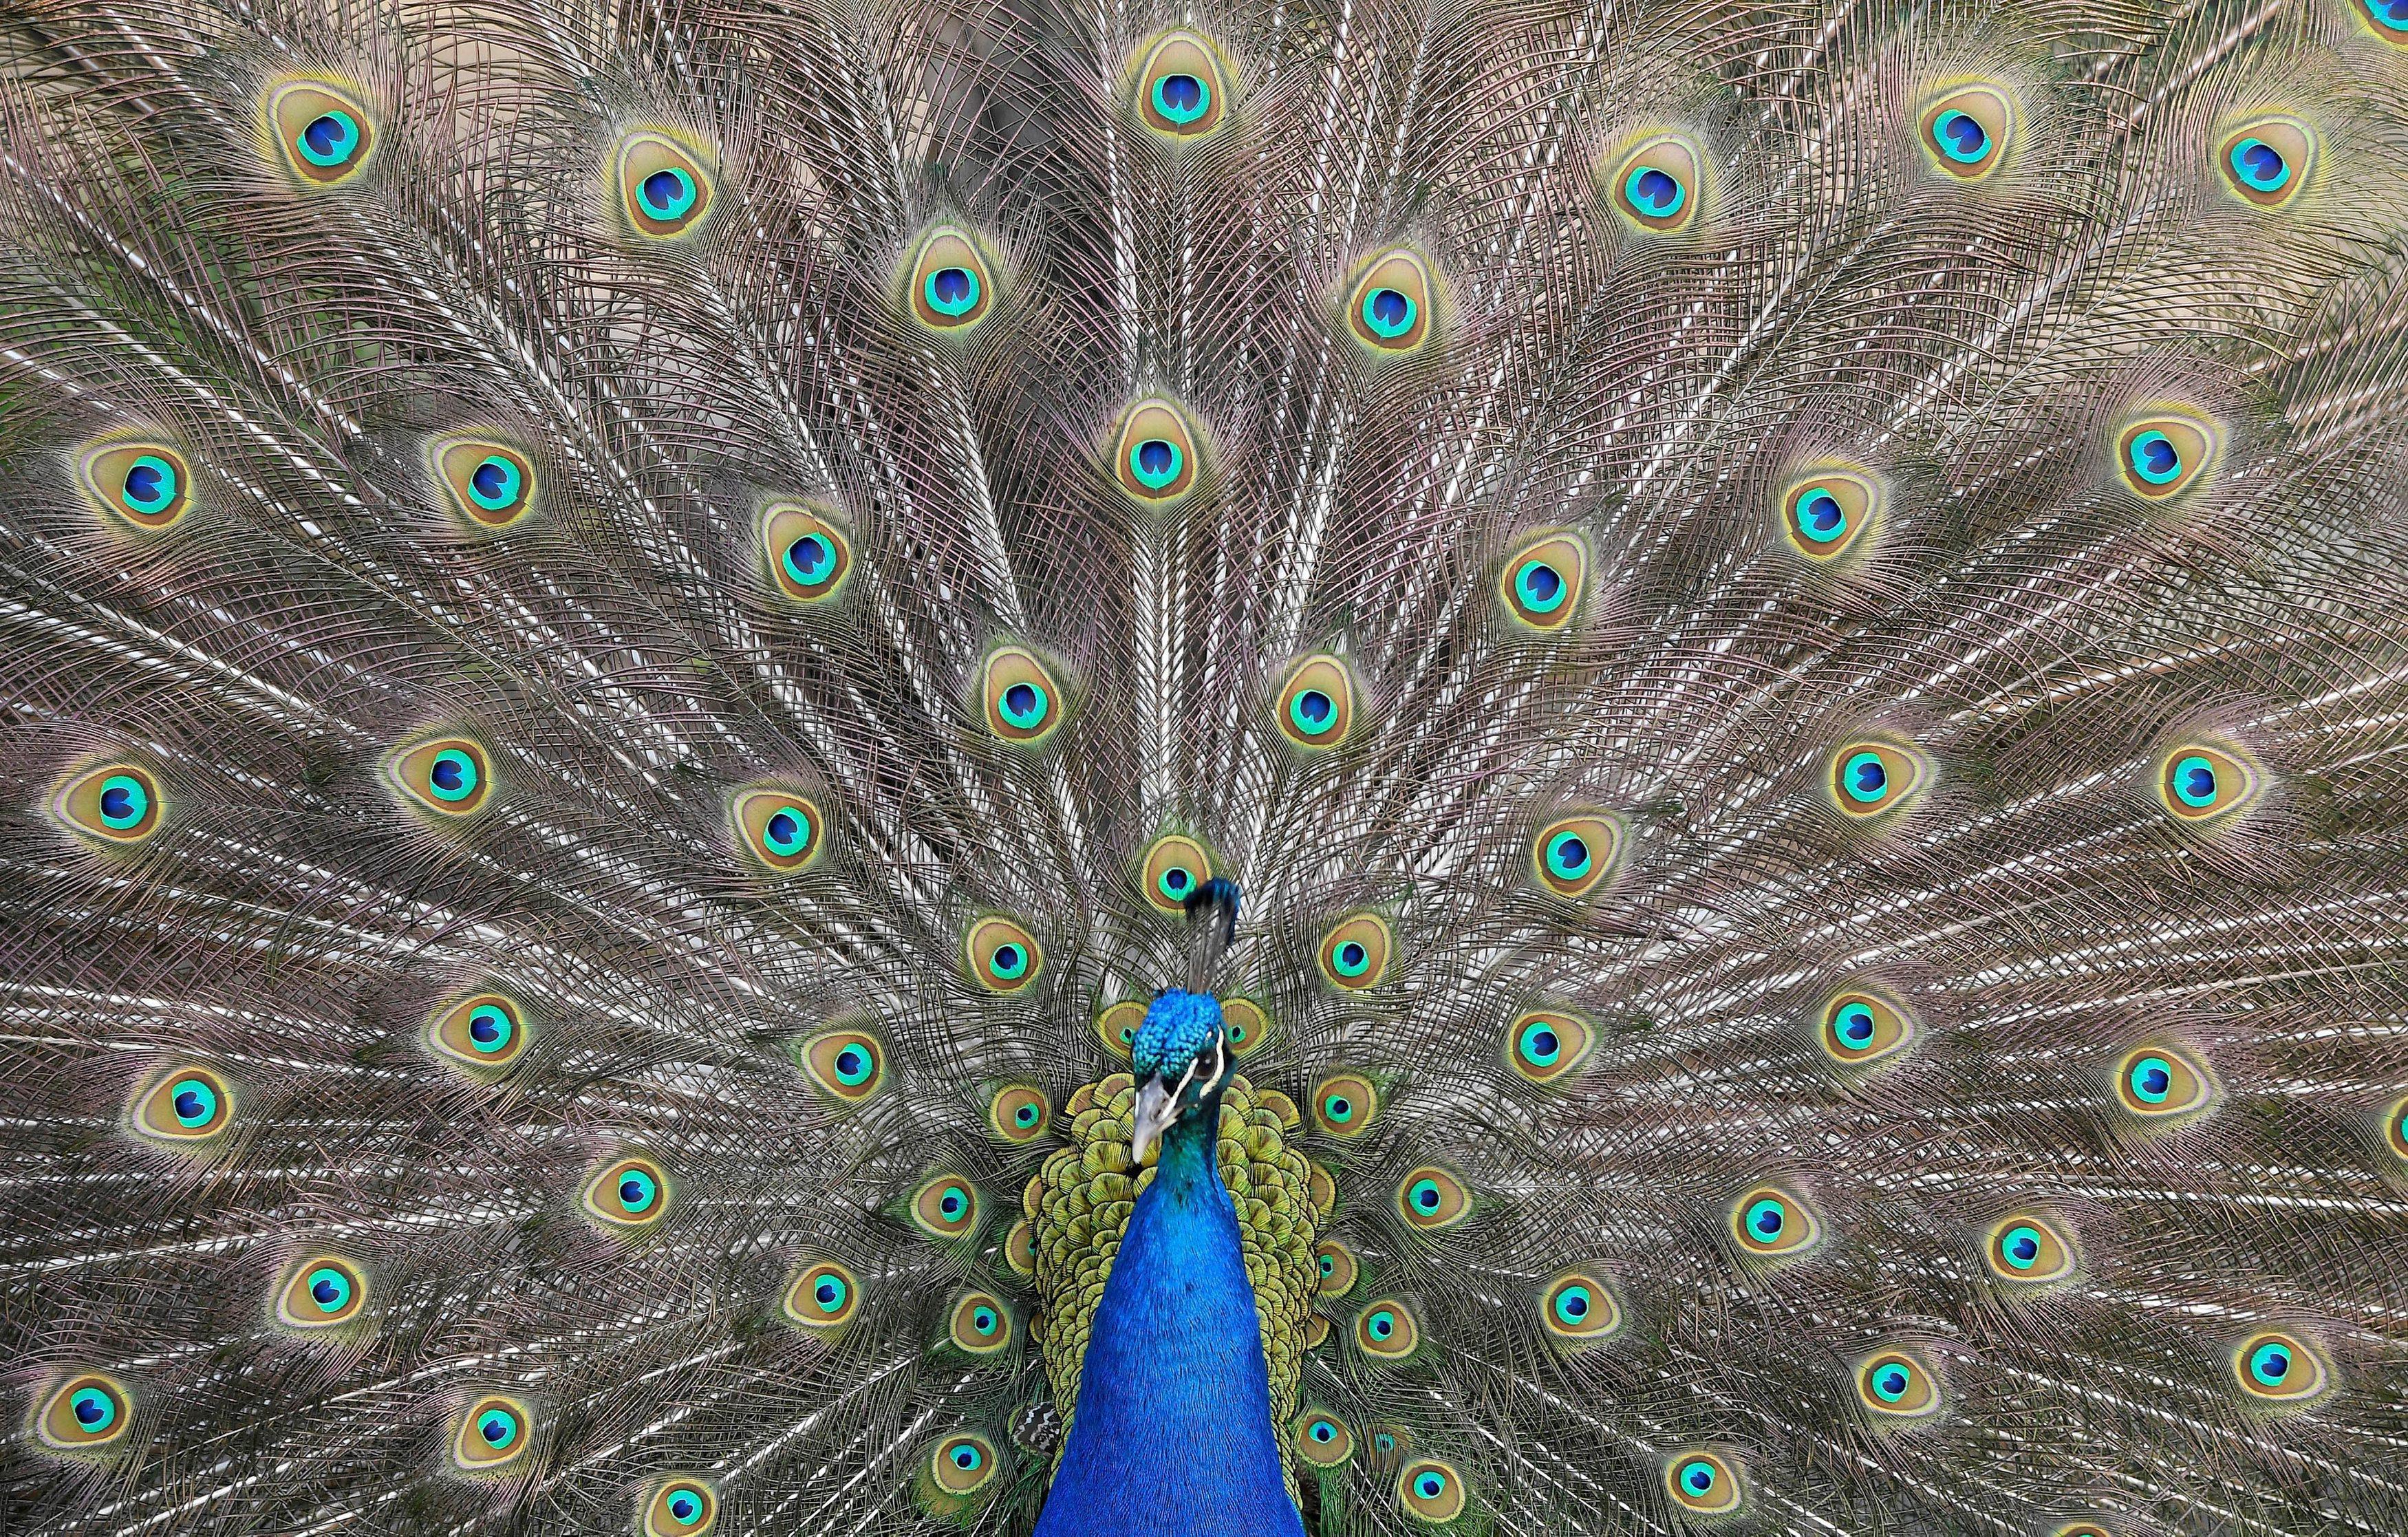 A peacock displays his plumage as part of a courtship ritual to attract a mate, at a park in London